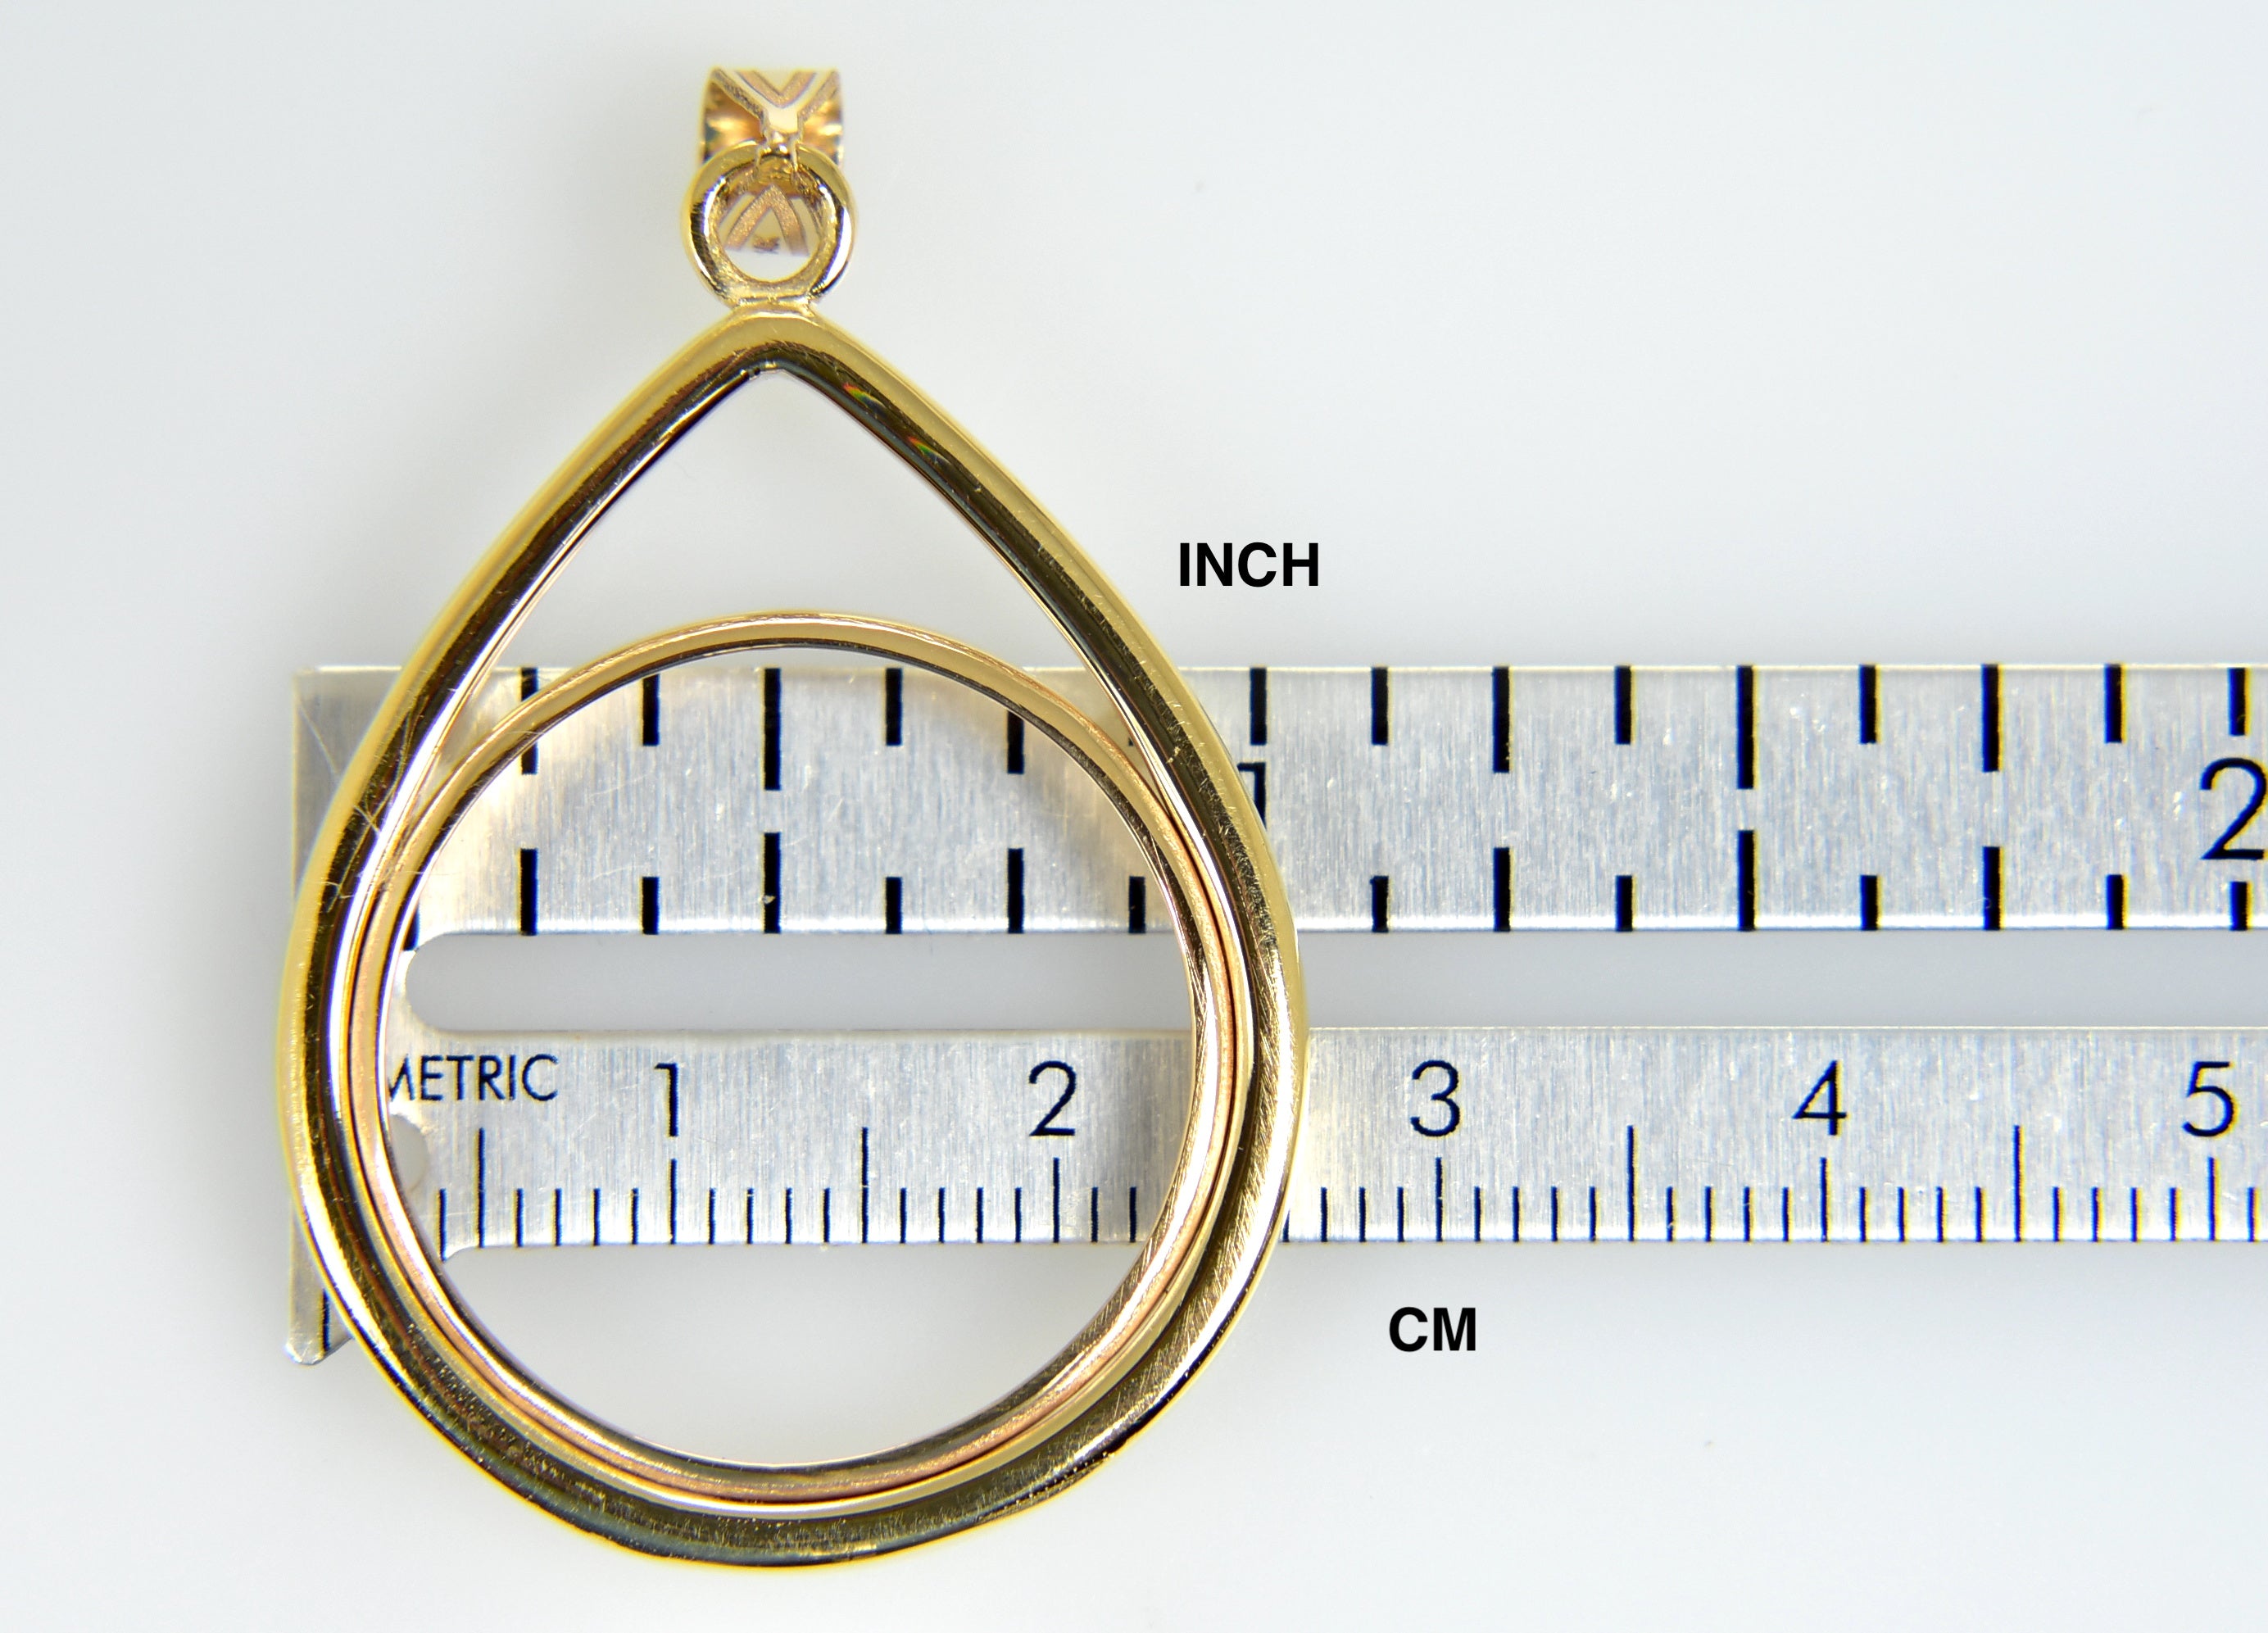 14K Yellow Gold 1/4 oz or One Fourth Ounce American Eagle Teardrop Coin Holder Holds 22mm x 1.8mm Coin Prong Bezel Pendant Charm